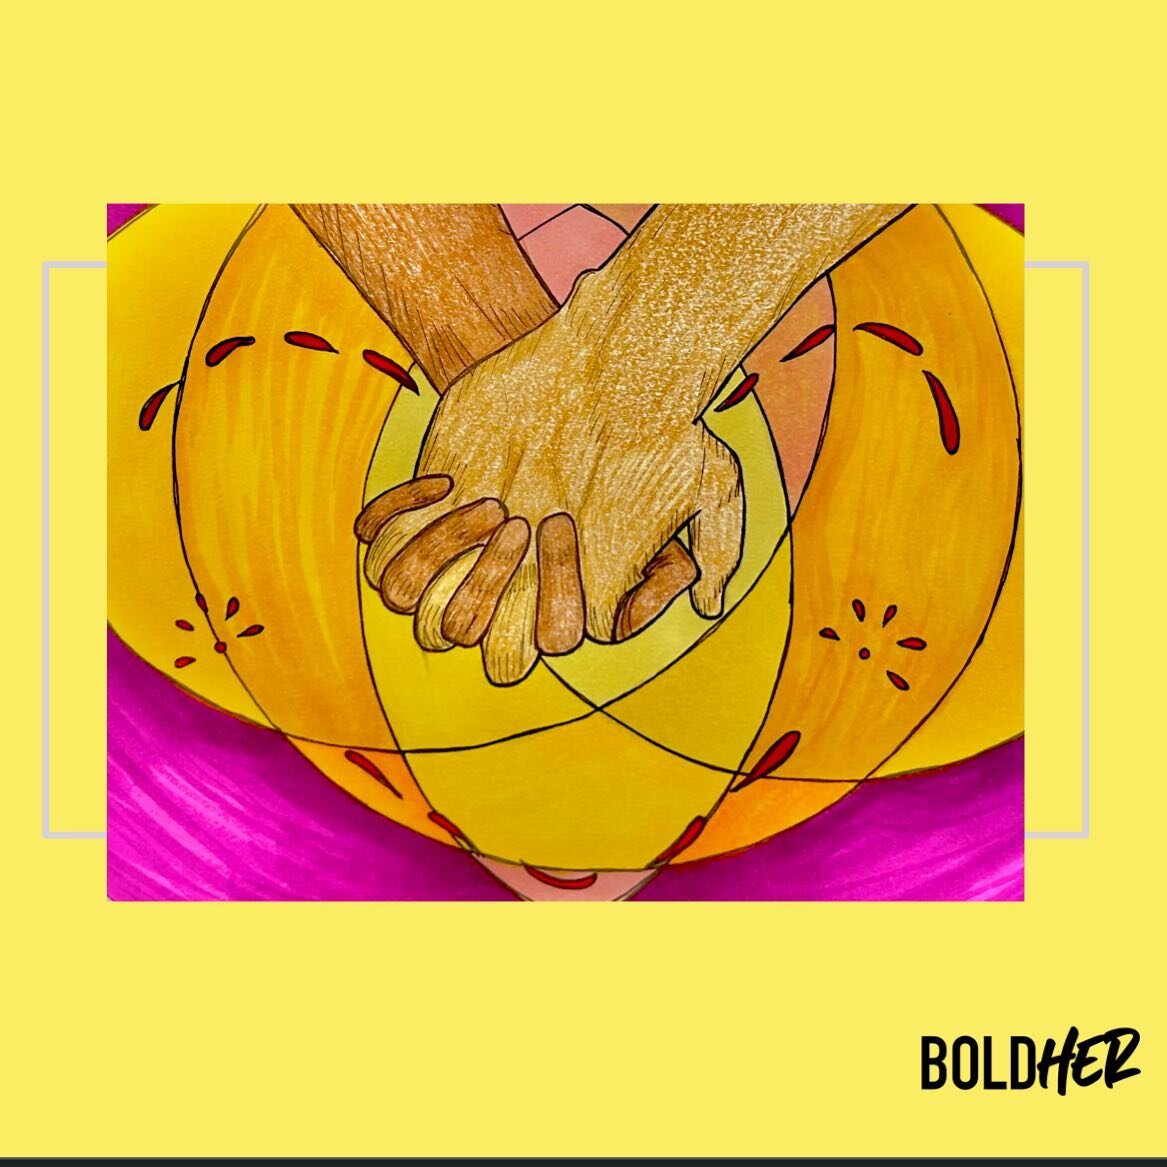 The members of BoldHER are sending love and care back to the mothers and maternal figures out there. Providing endless love, support, and guidance for their families and those within their circles, the world is full of leaders, caretakers, healers, l